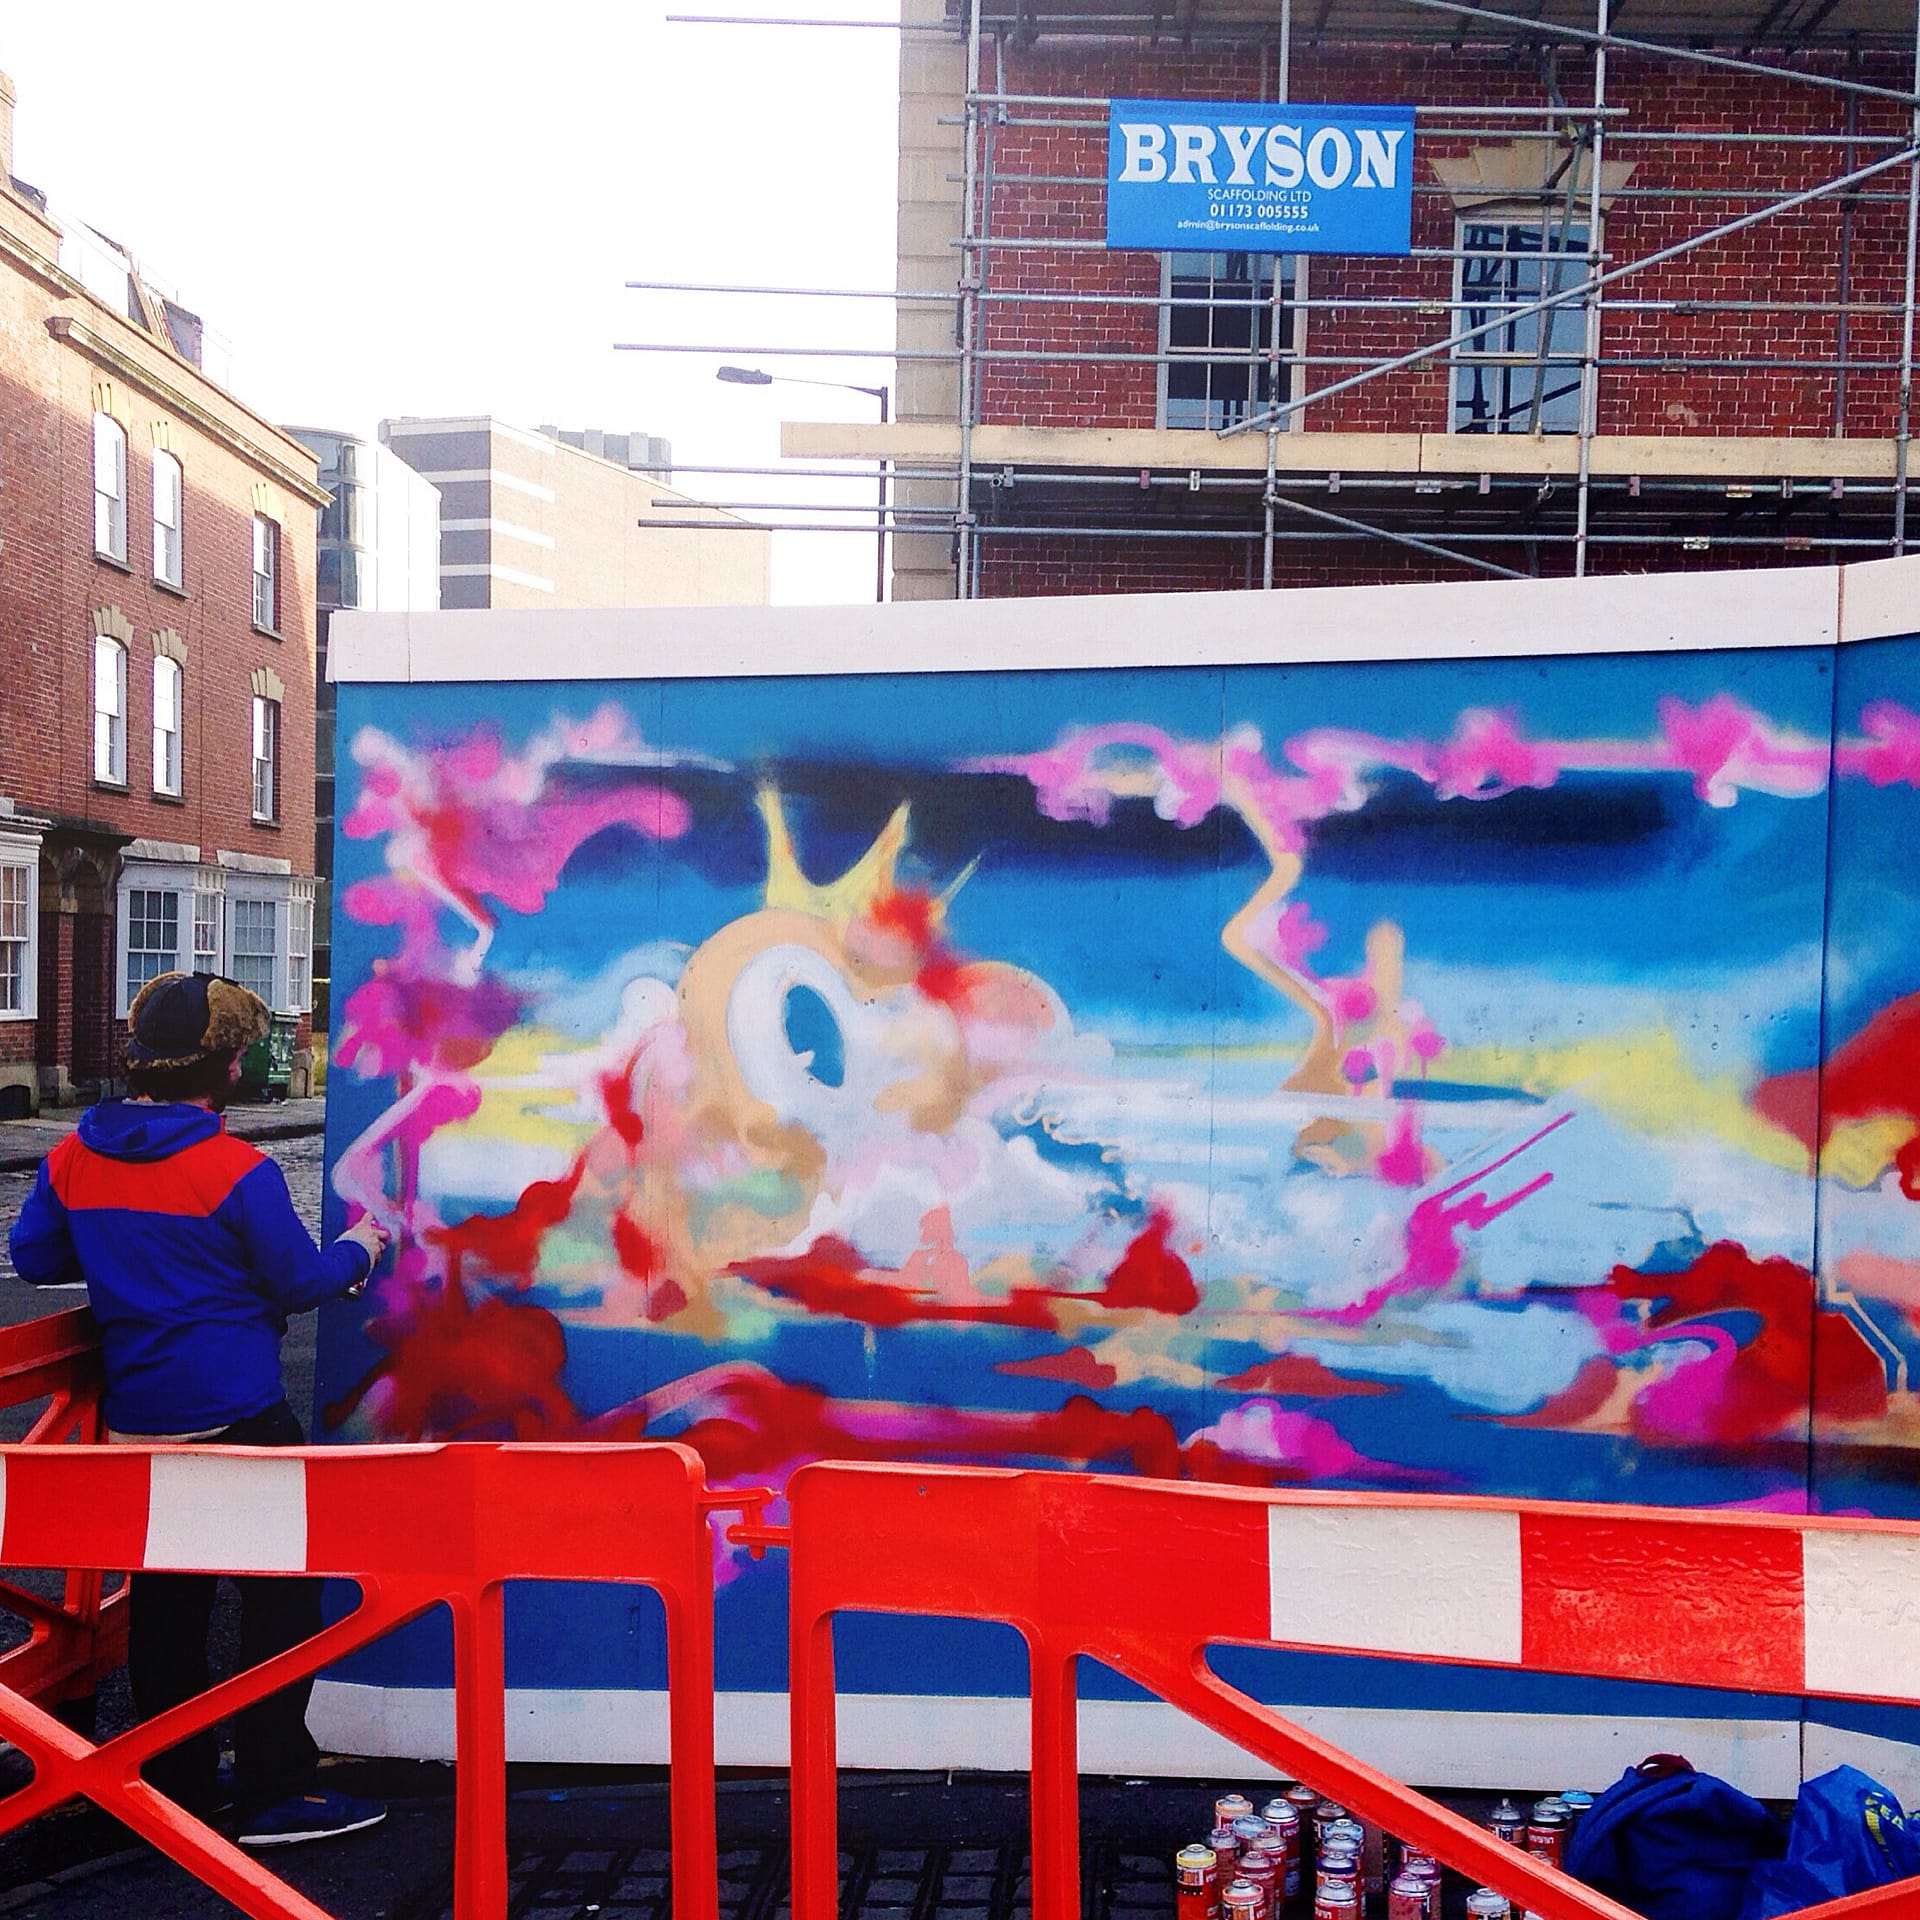 Best things to do in Bristol, from street art to the Christmas Steps